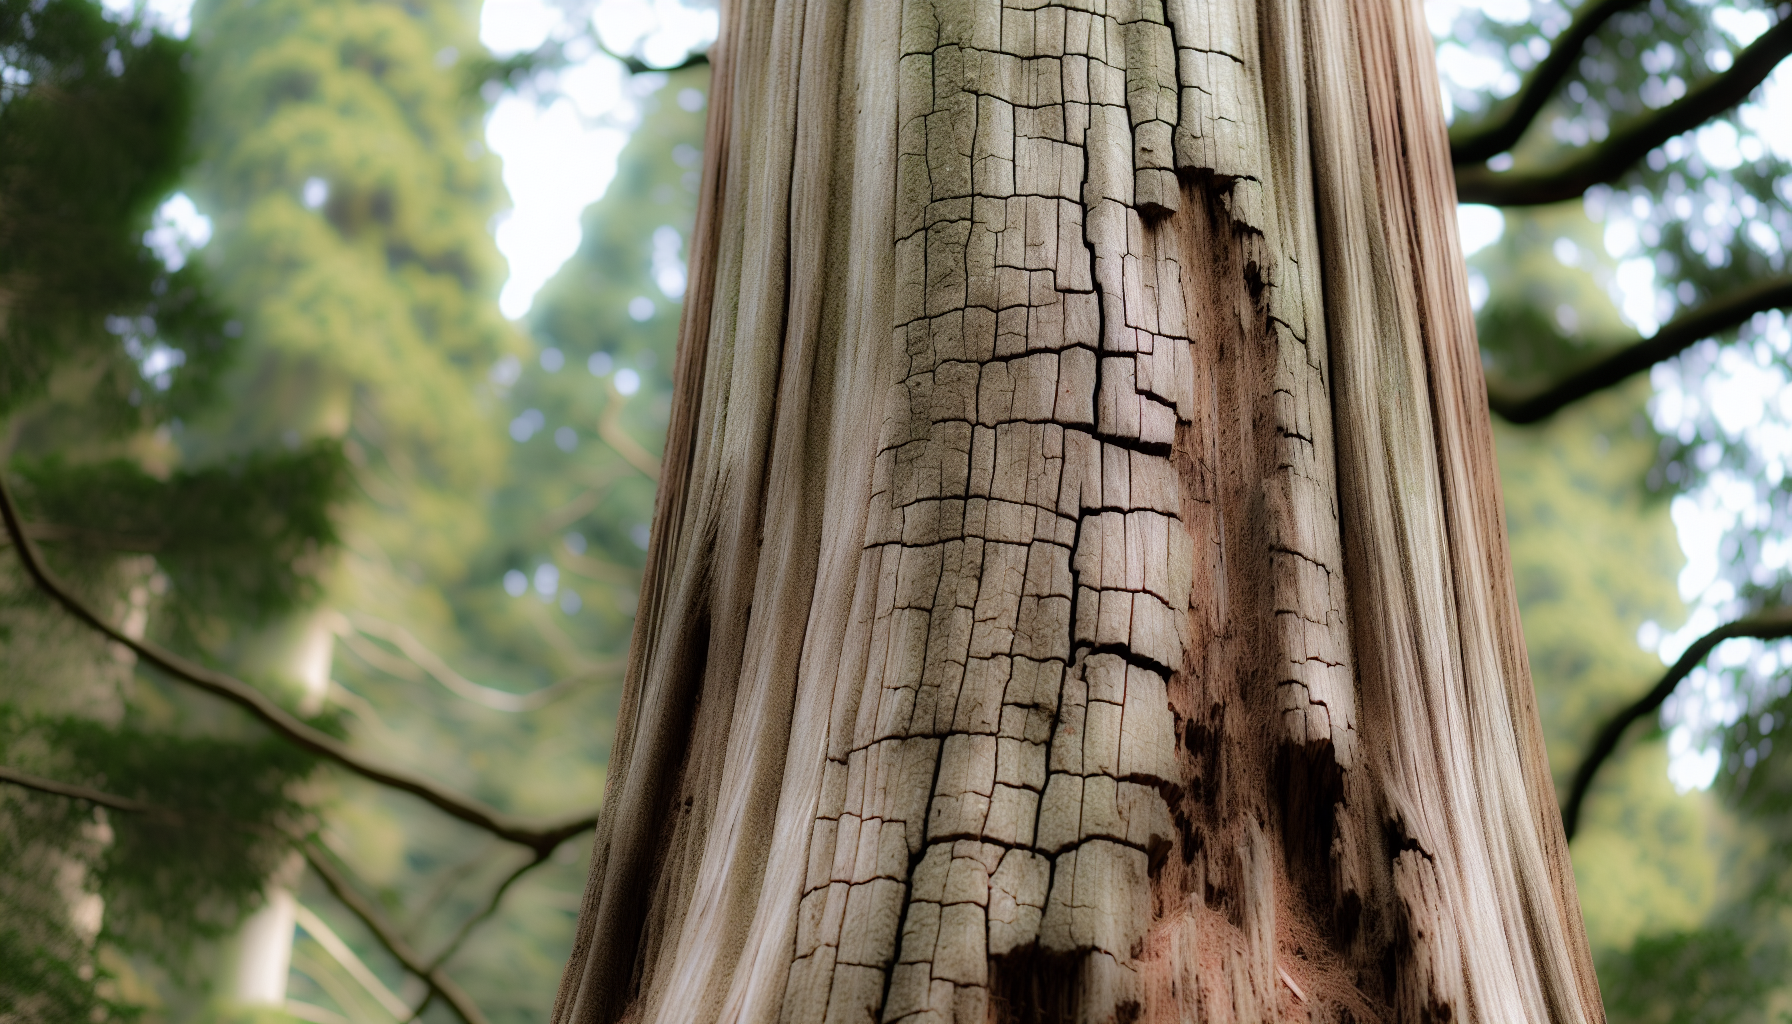 A close-up of a tree trunk with large vertical cracks